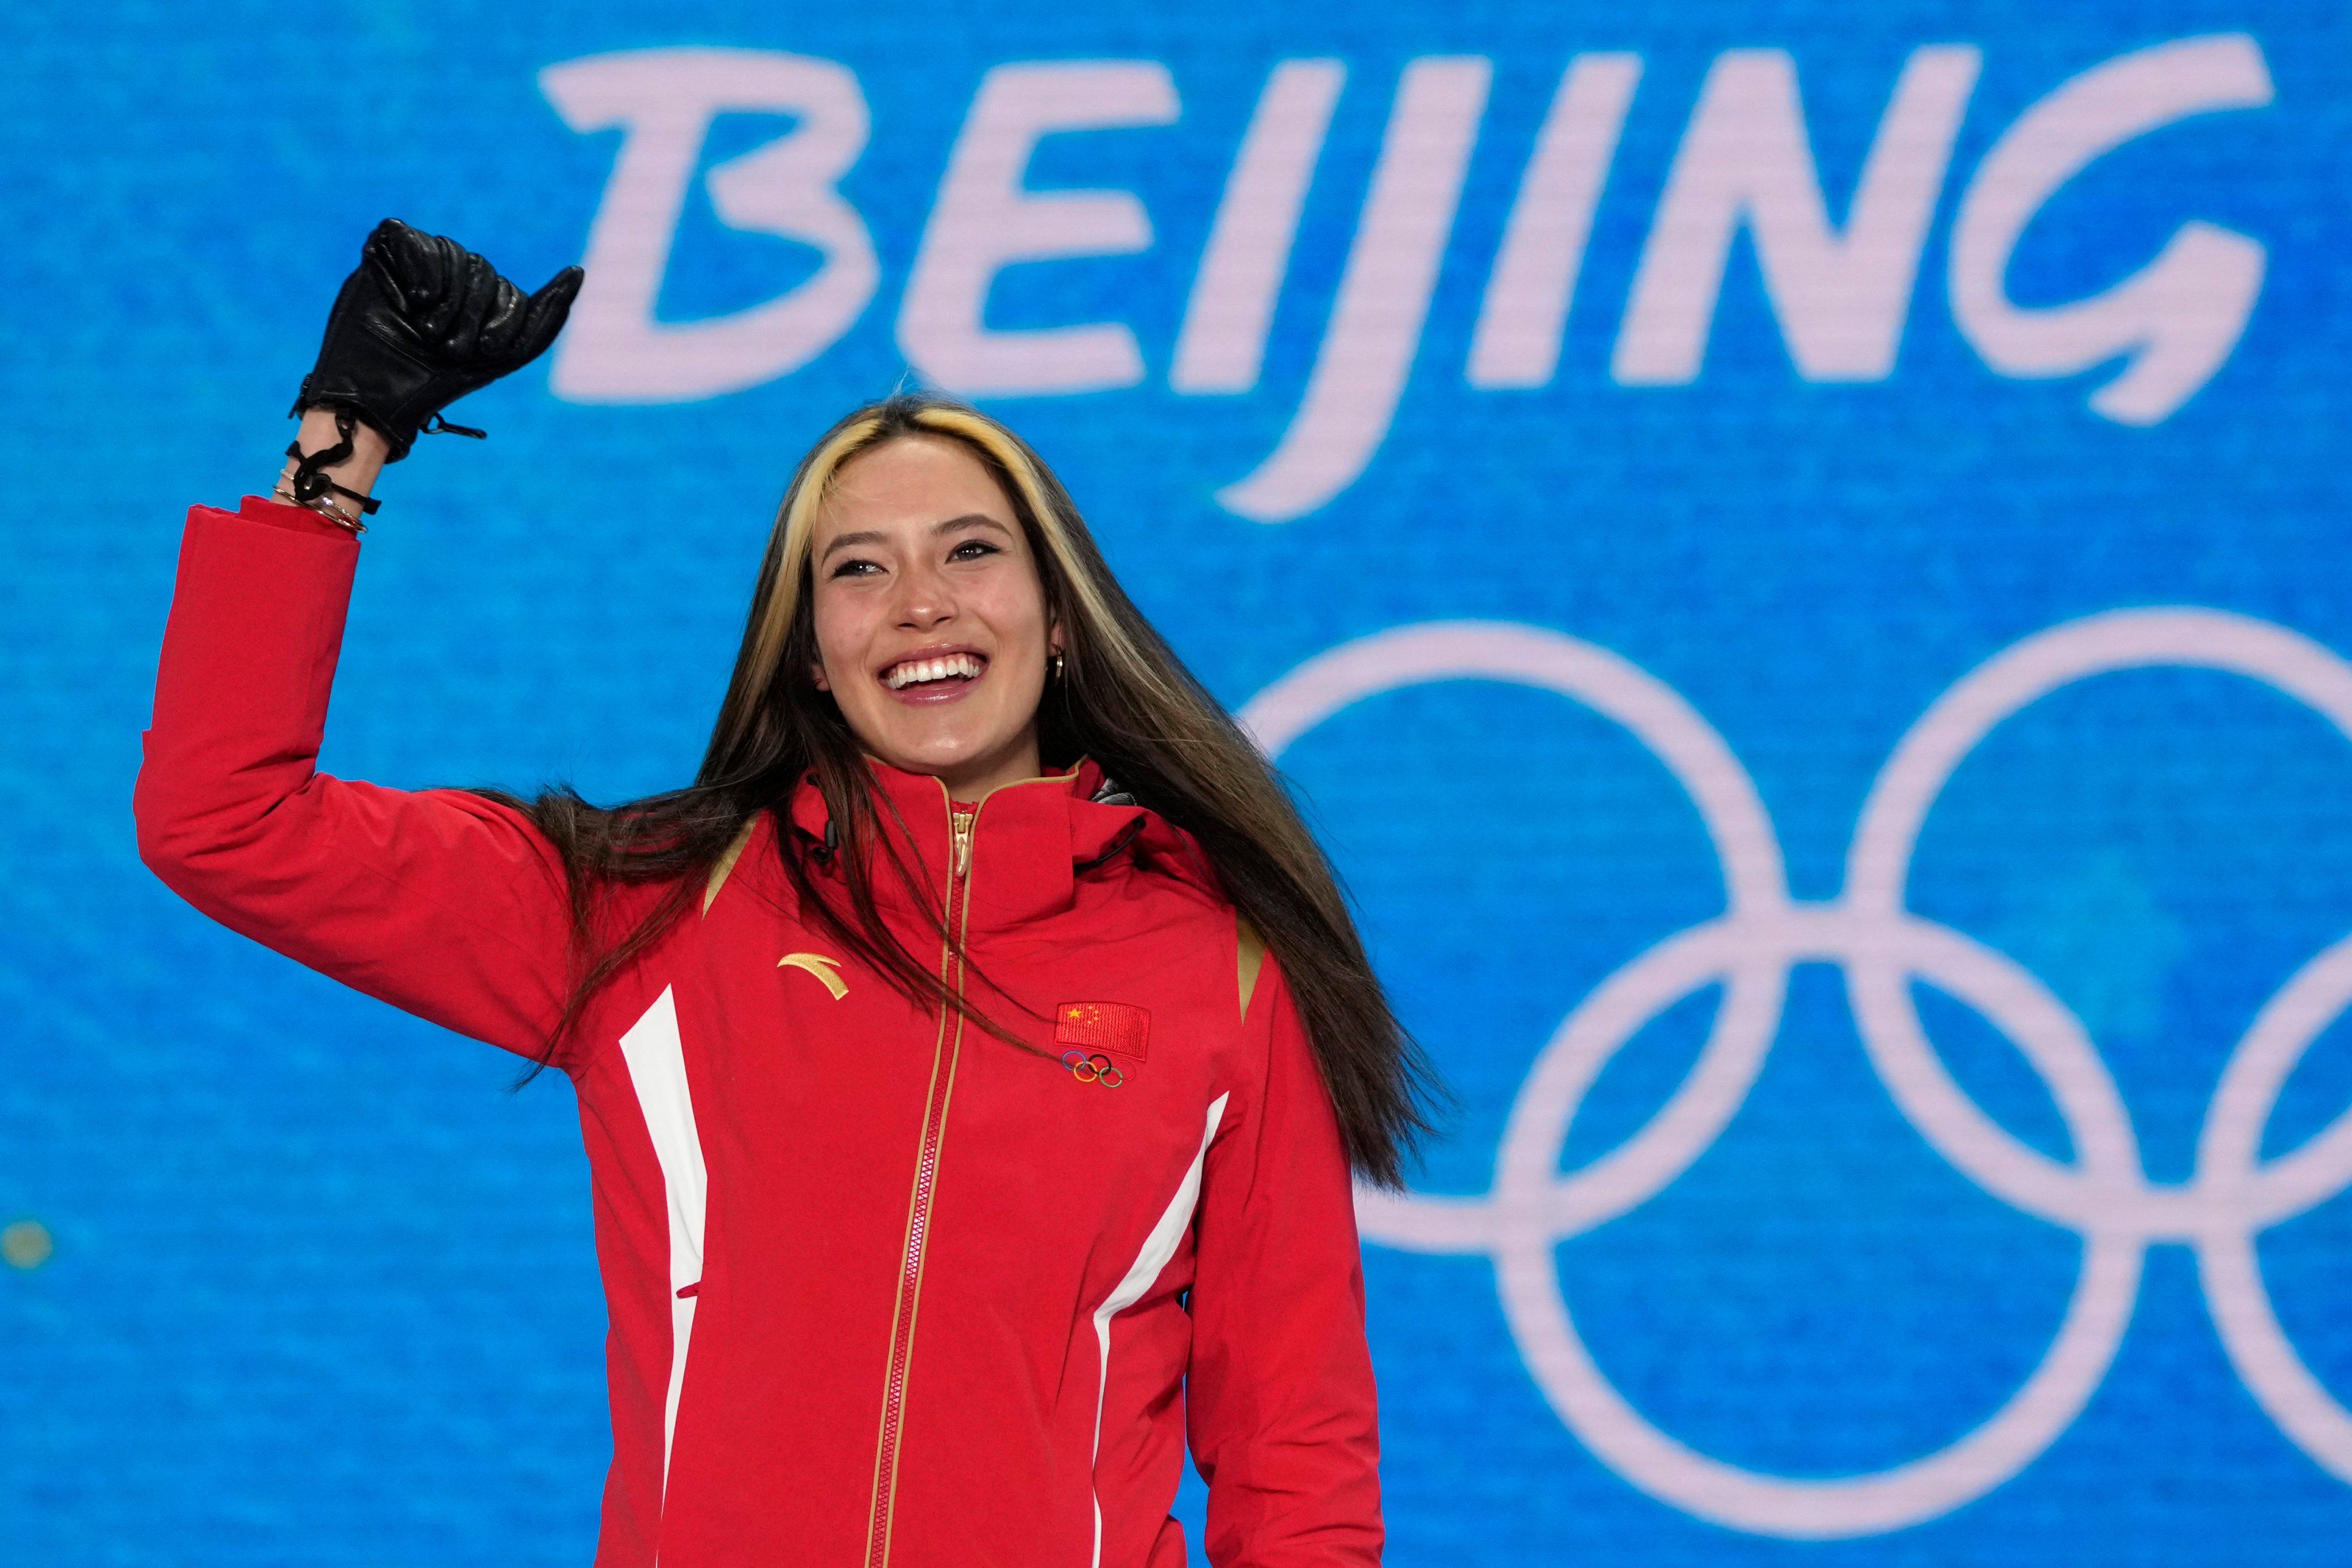 China’s Eileen Gu celebrates during a medal ceremony for the women’s freestyle skiing halfpipe at the 2022 Winter Olympics. Photo: AP